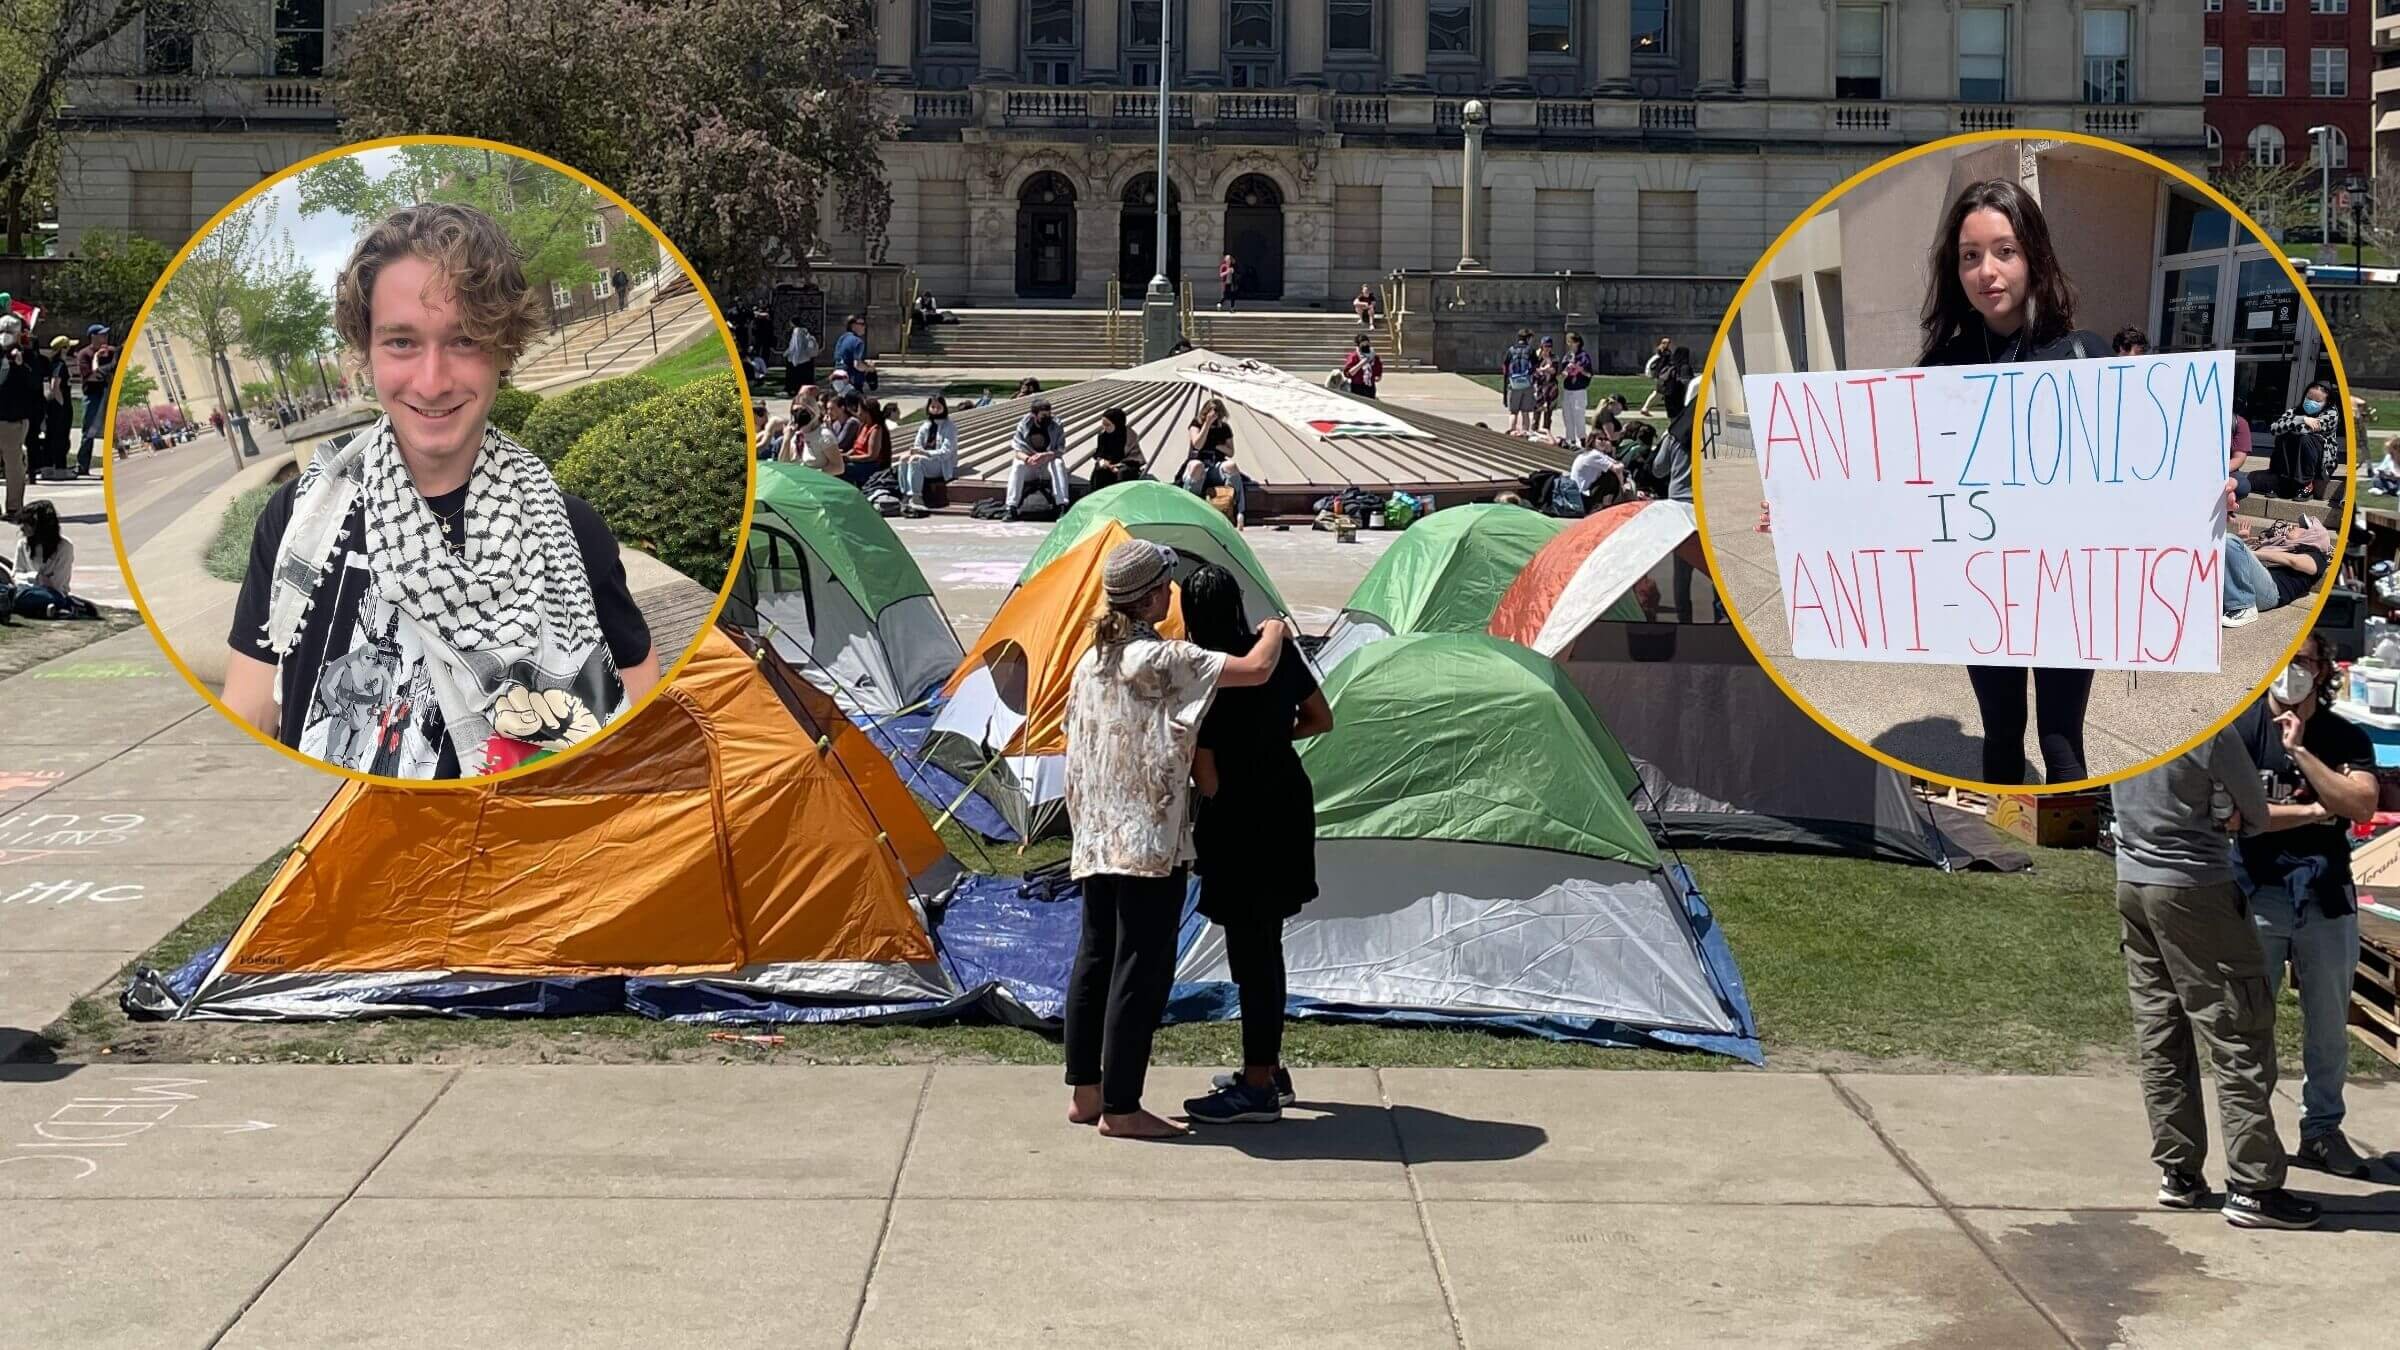 Pro-Palestinian and pro-Israel student activists and the pro-Palestinian encampment at the University of Wisconsin-Madison which protesters on Friday agreed to take it down in exchange for concessions from the administration.